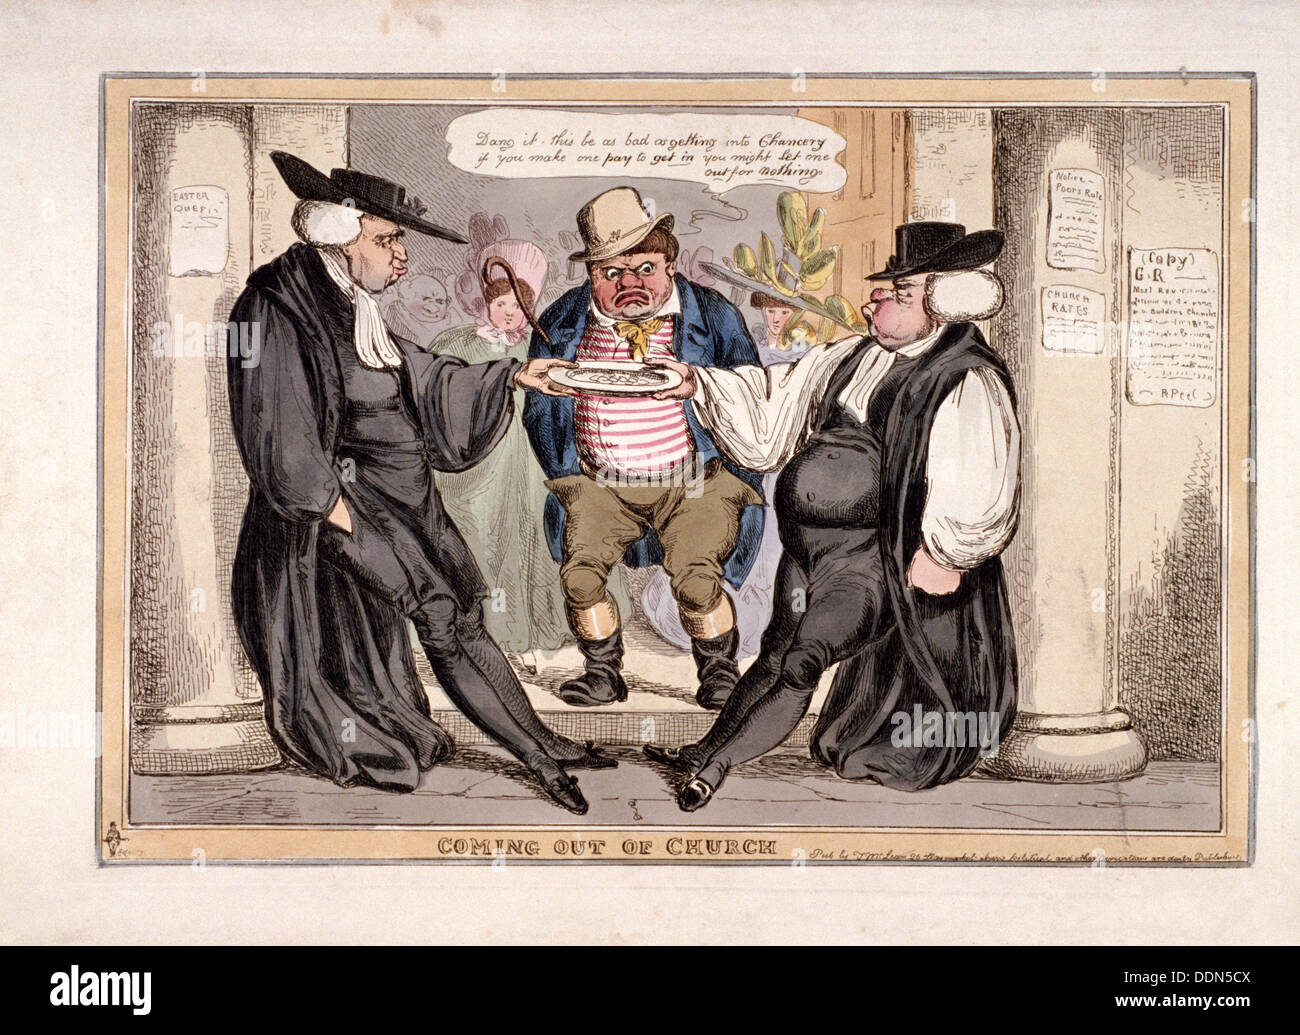 'Coming out of church', London, c1815. Artist: Anon Stock Photo